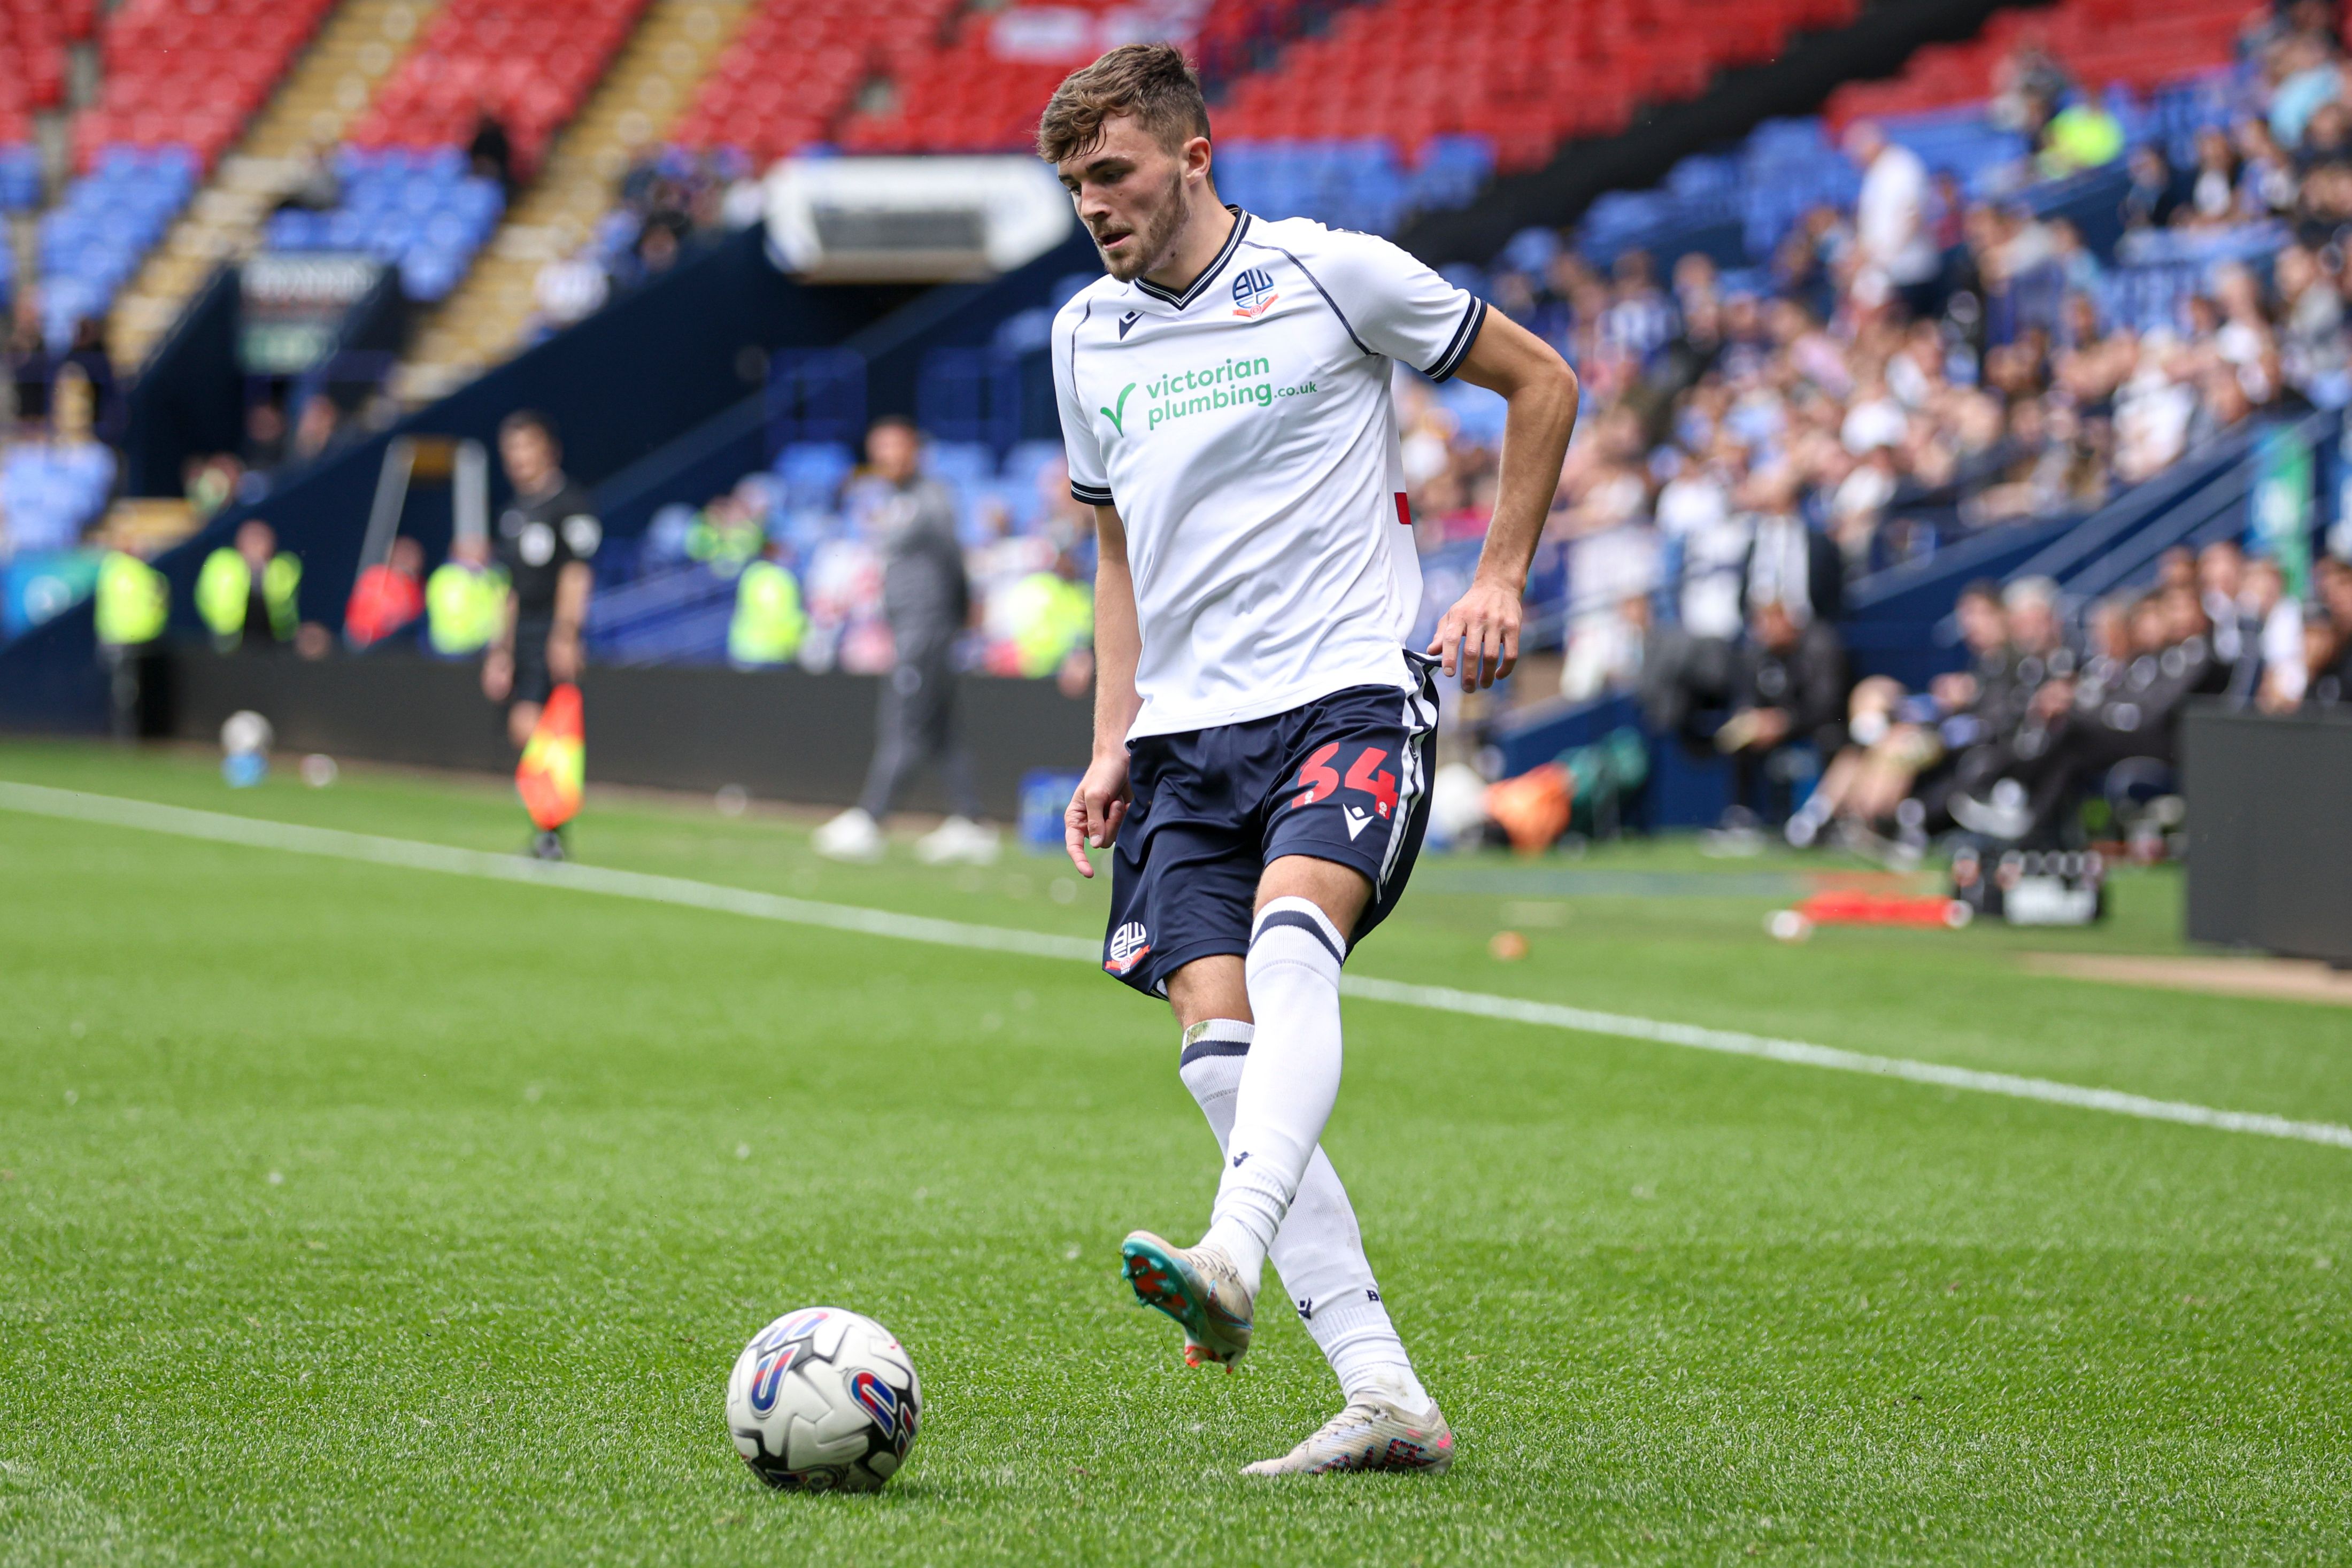 Max Conway West Brom friendly